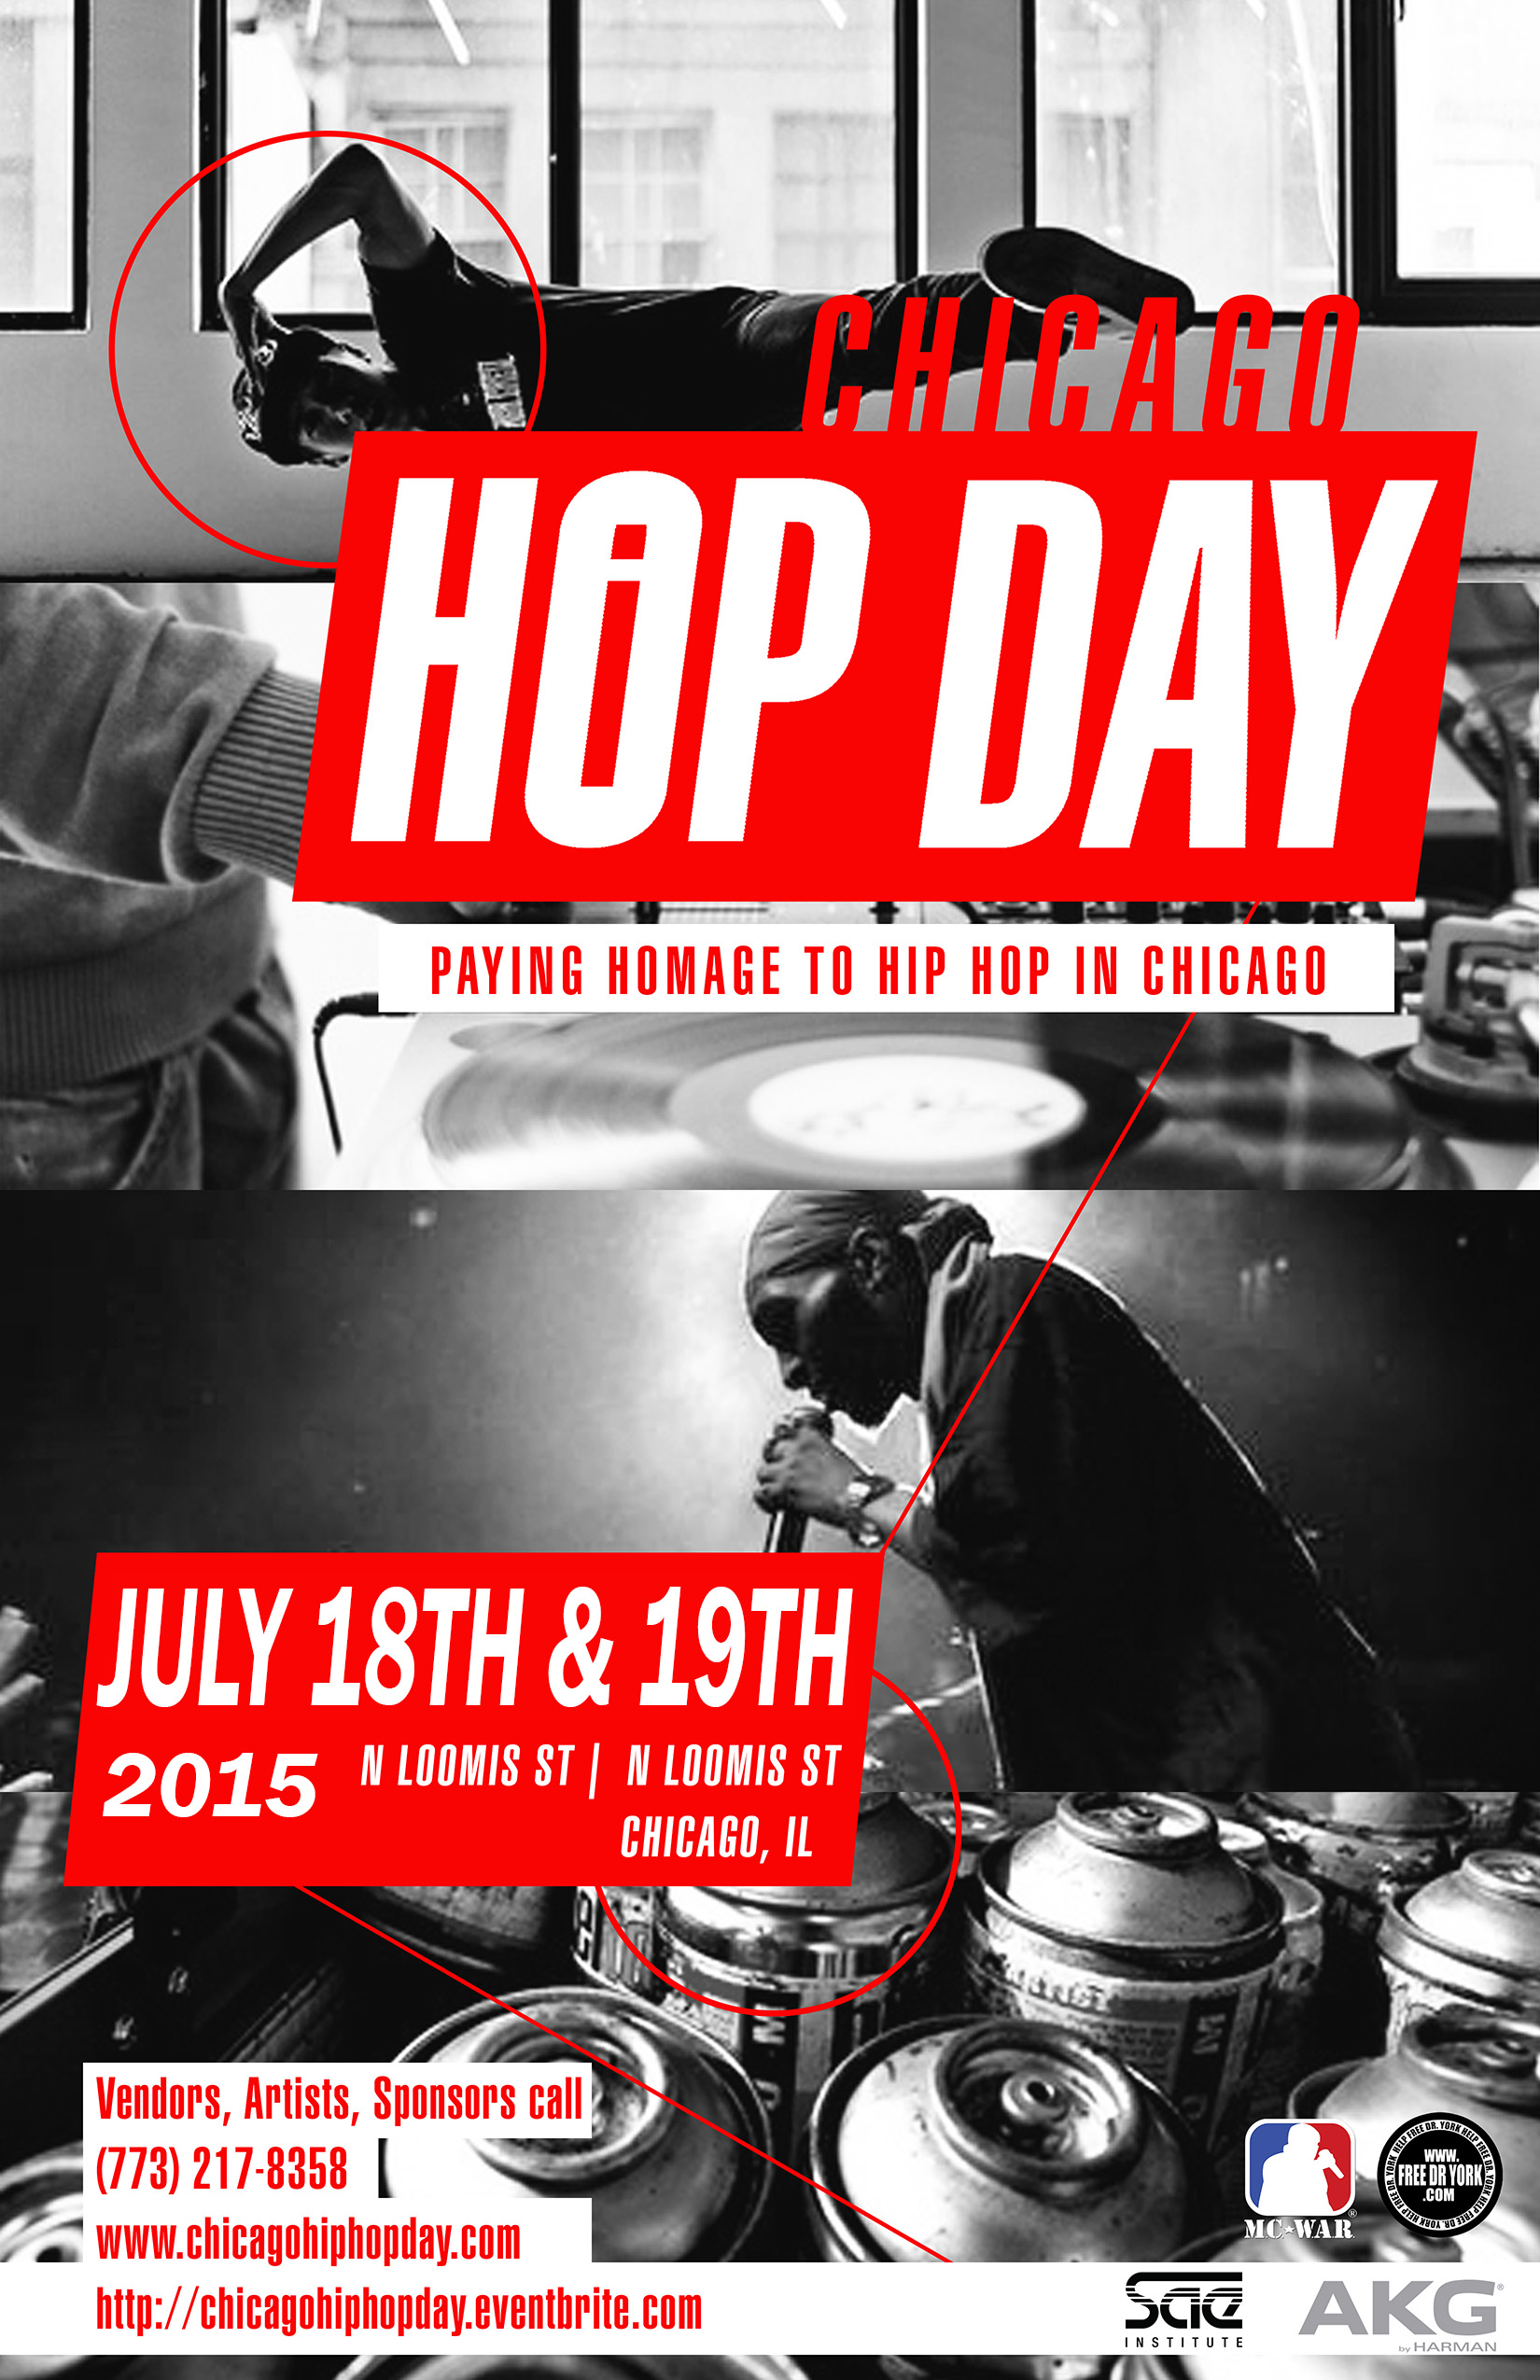 ANNUAL CHICAGO HIP HOP DAY FESTIVAL Tickets, Sat, Jul 23, 2016 at 1100